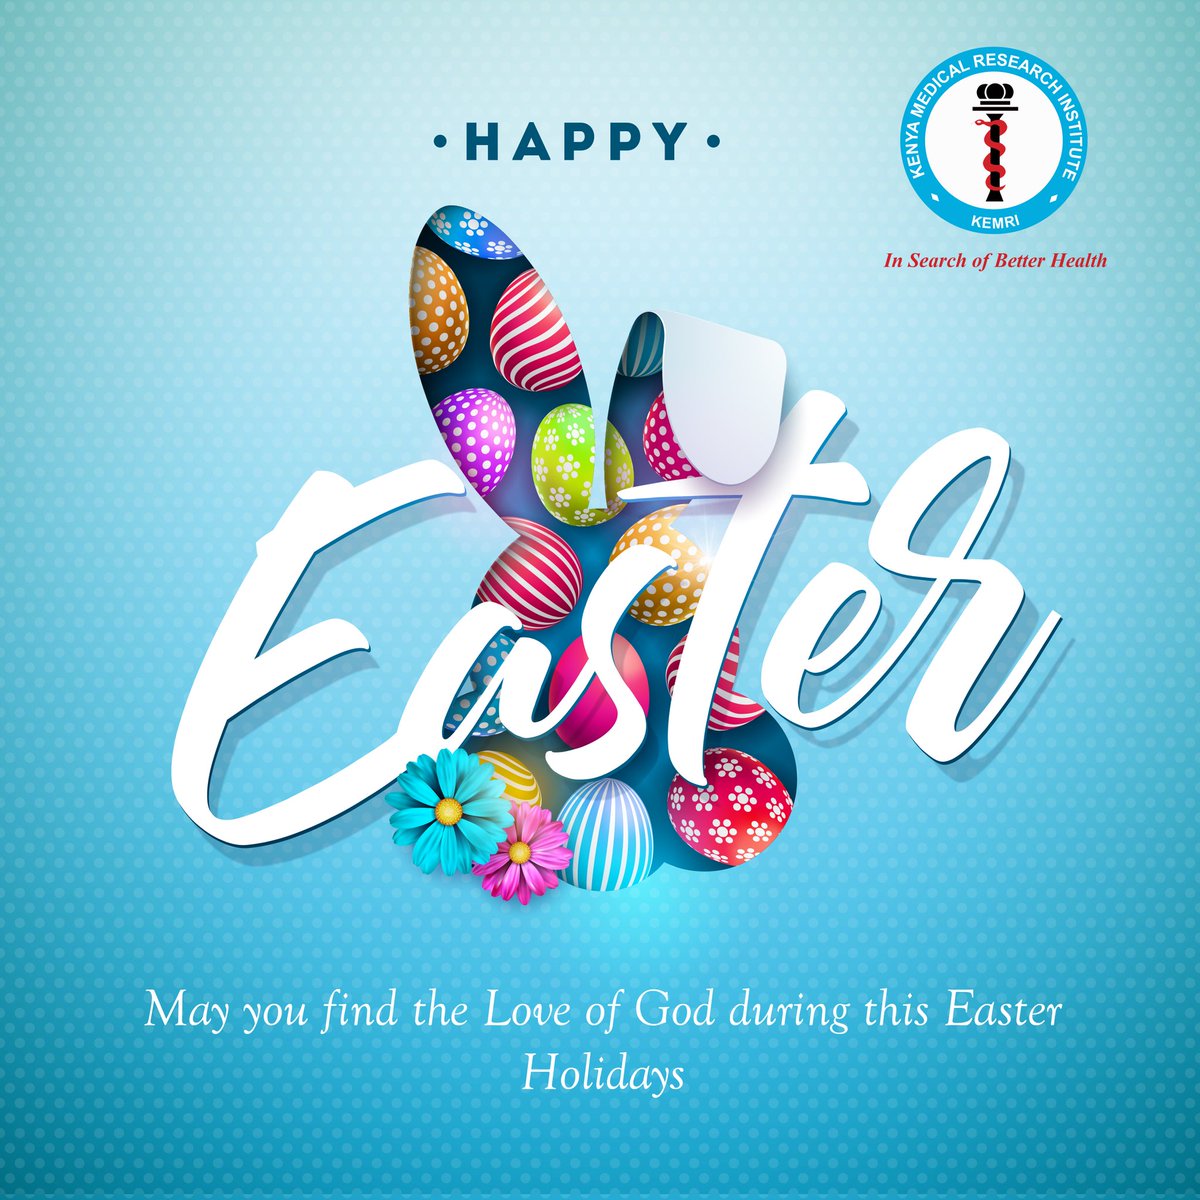 Happy Easter from the KEMRI fraternity! As we celebrate this joyous season of renewal, may the spirit of hope and inspiration fill your hearts and minds. Wishing you a blessed Easter filled with peace, love, and sustained health